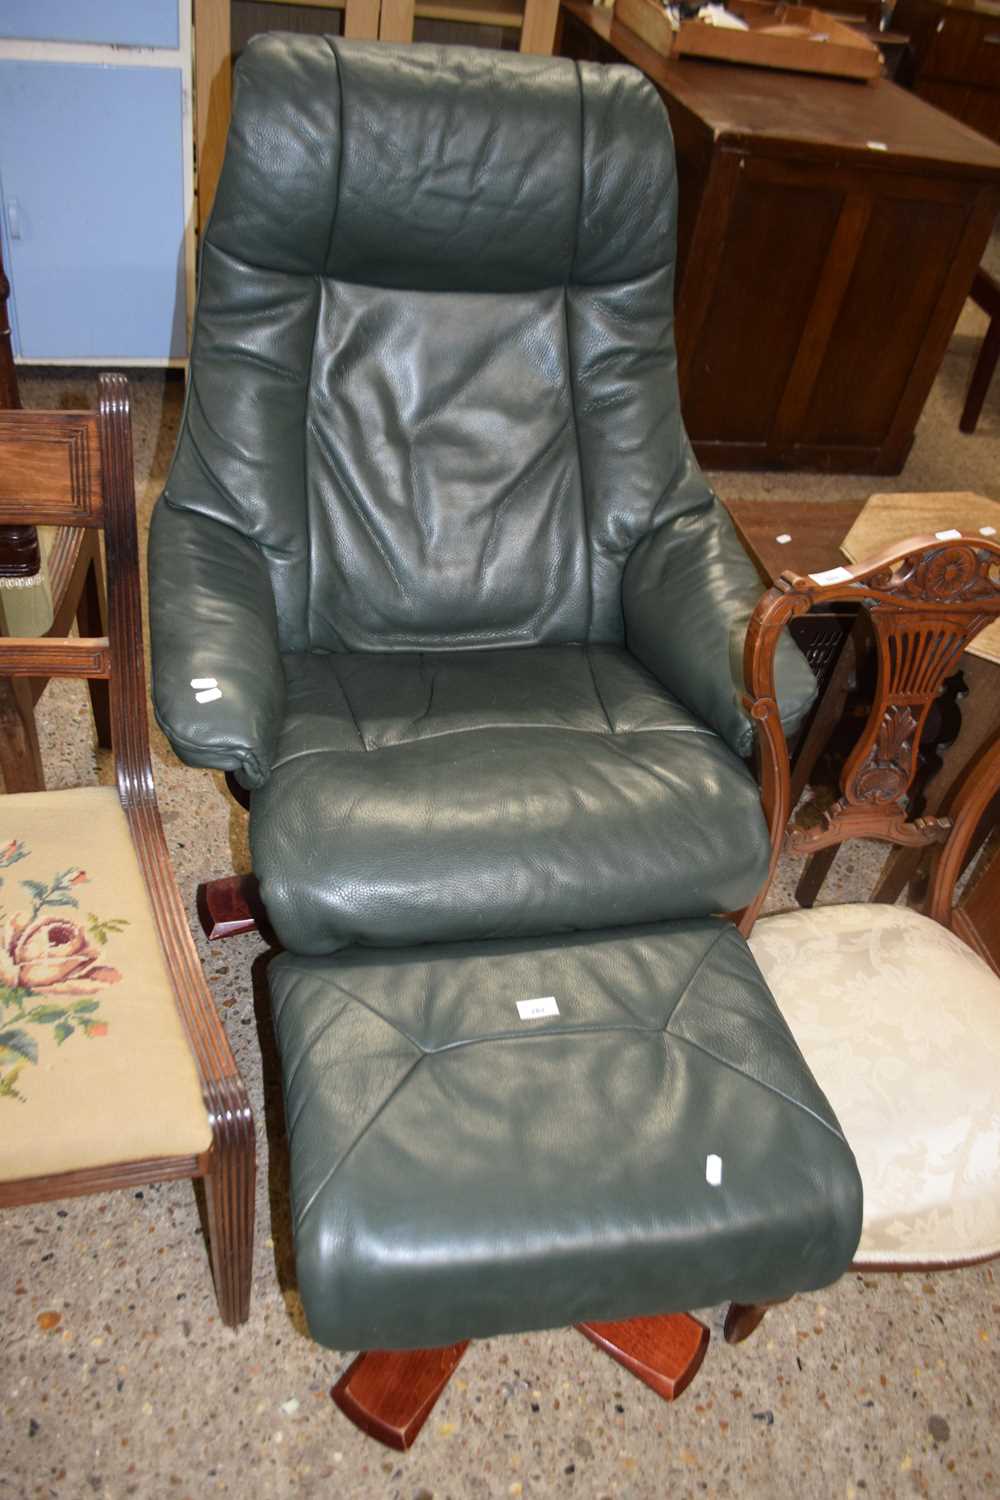 Green leather upholstered recliner chair and stool